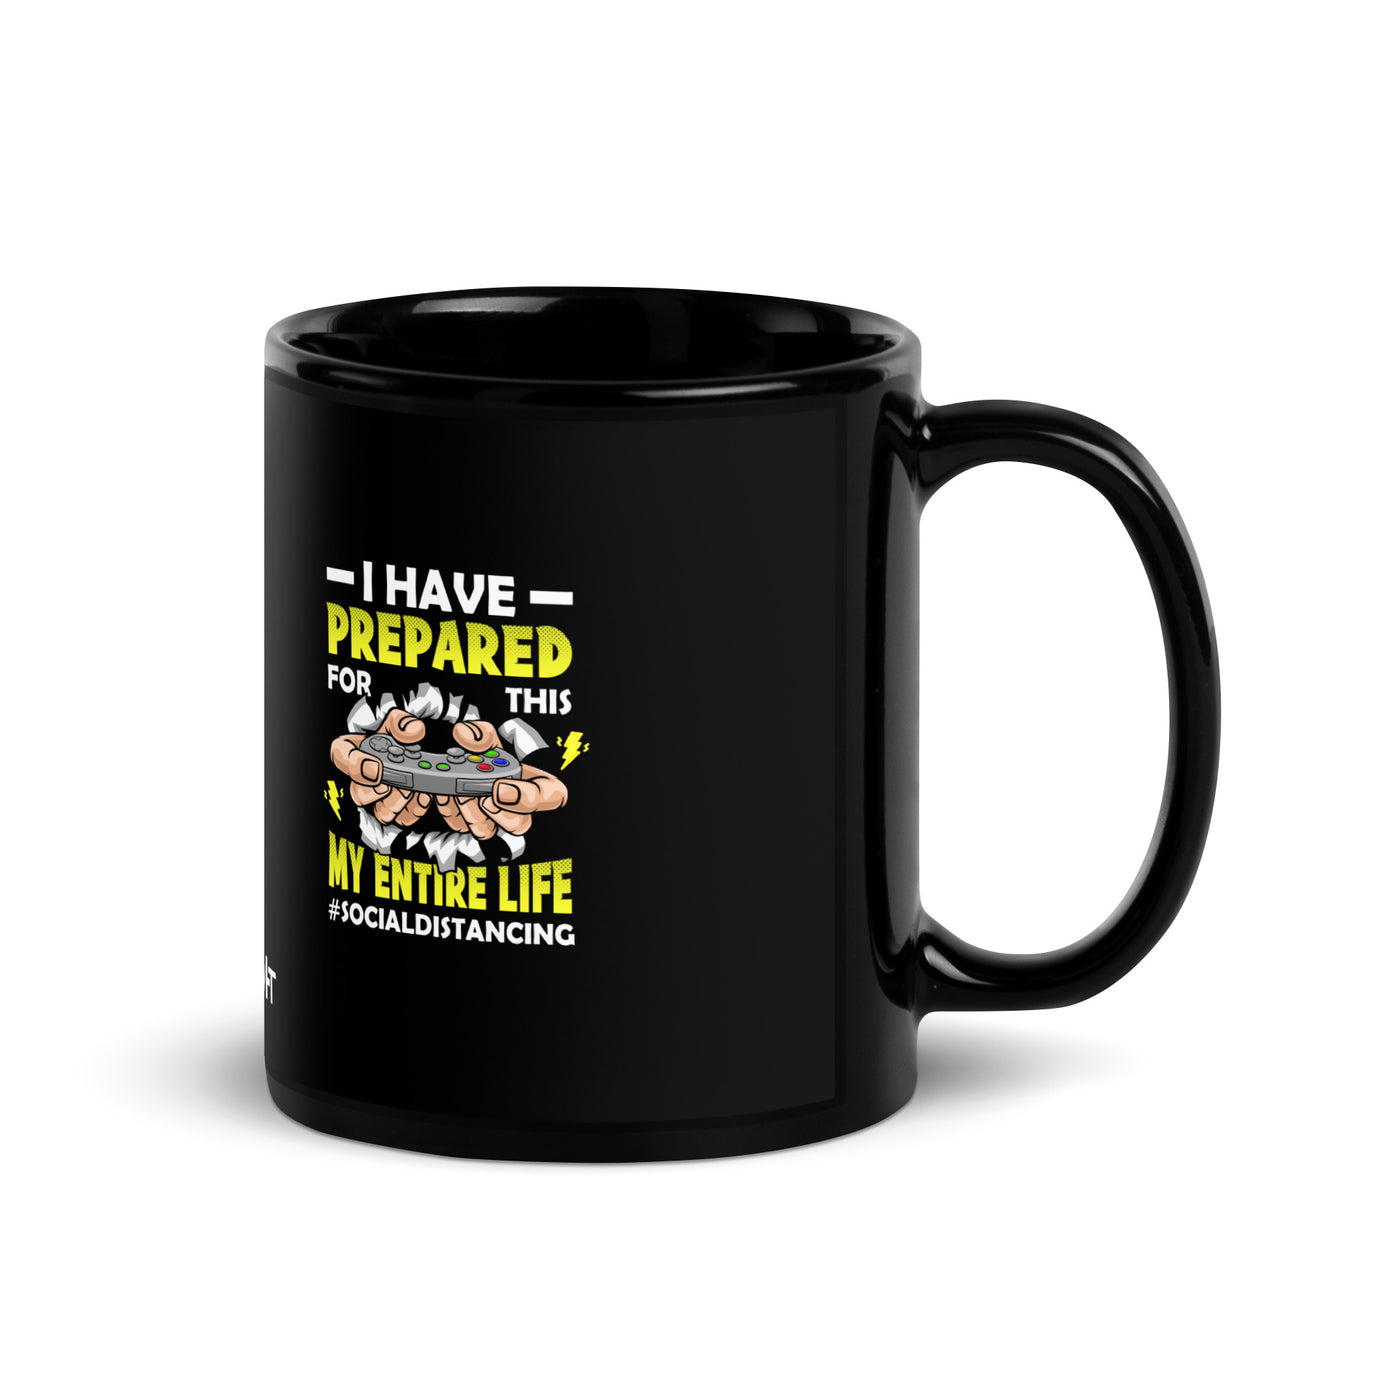 I have prepared for  this My Entire Life #Social Distancing - Black Glossy Mug